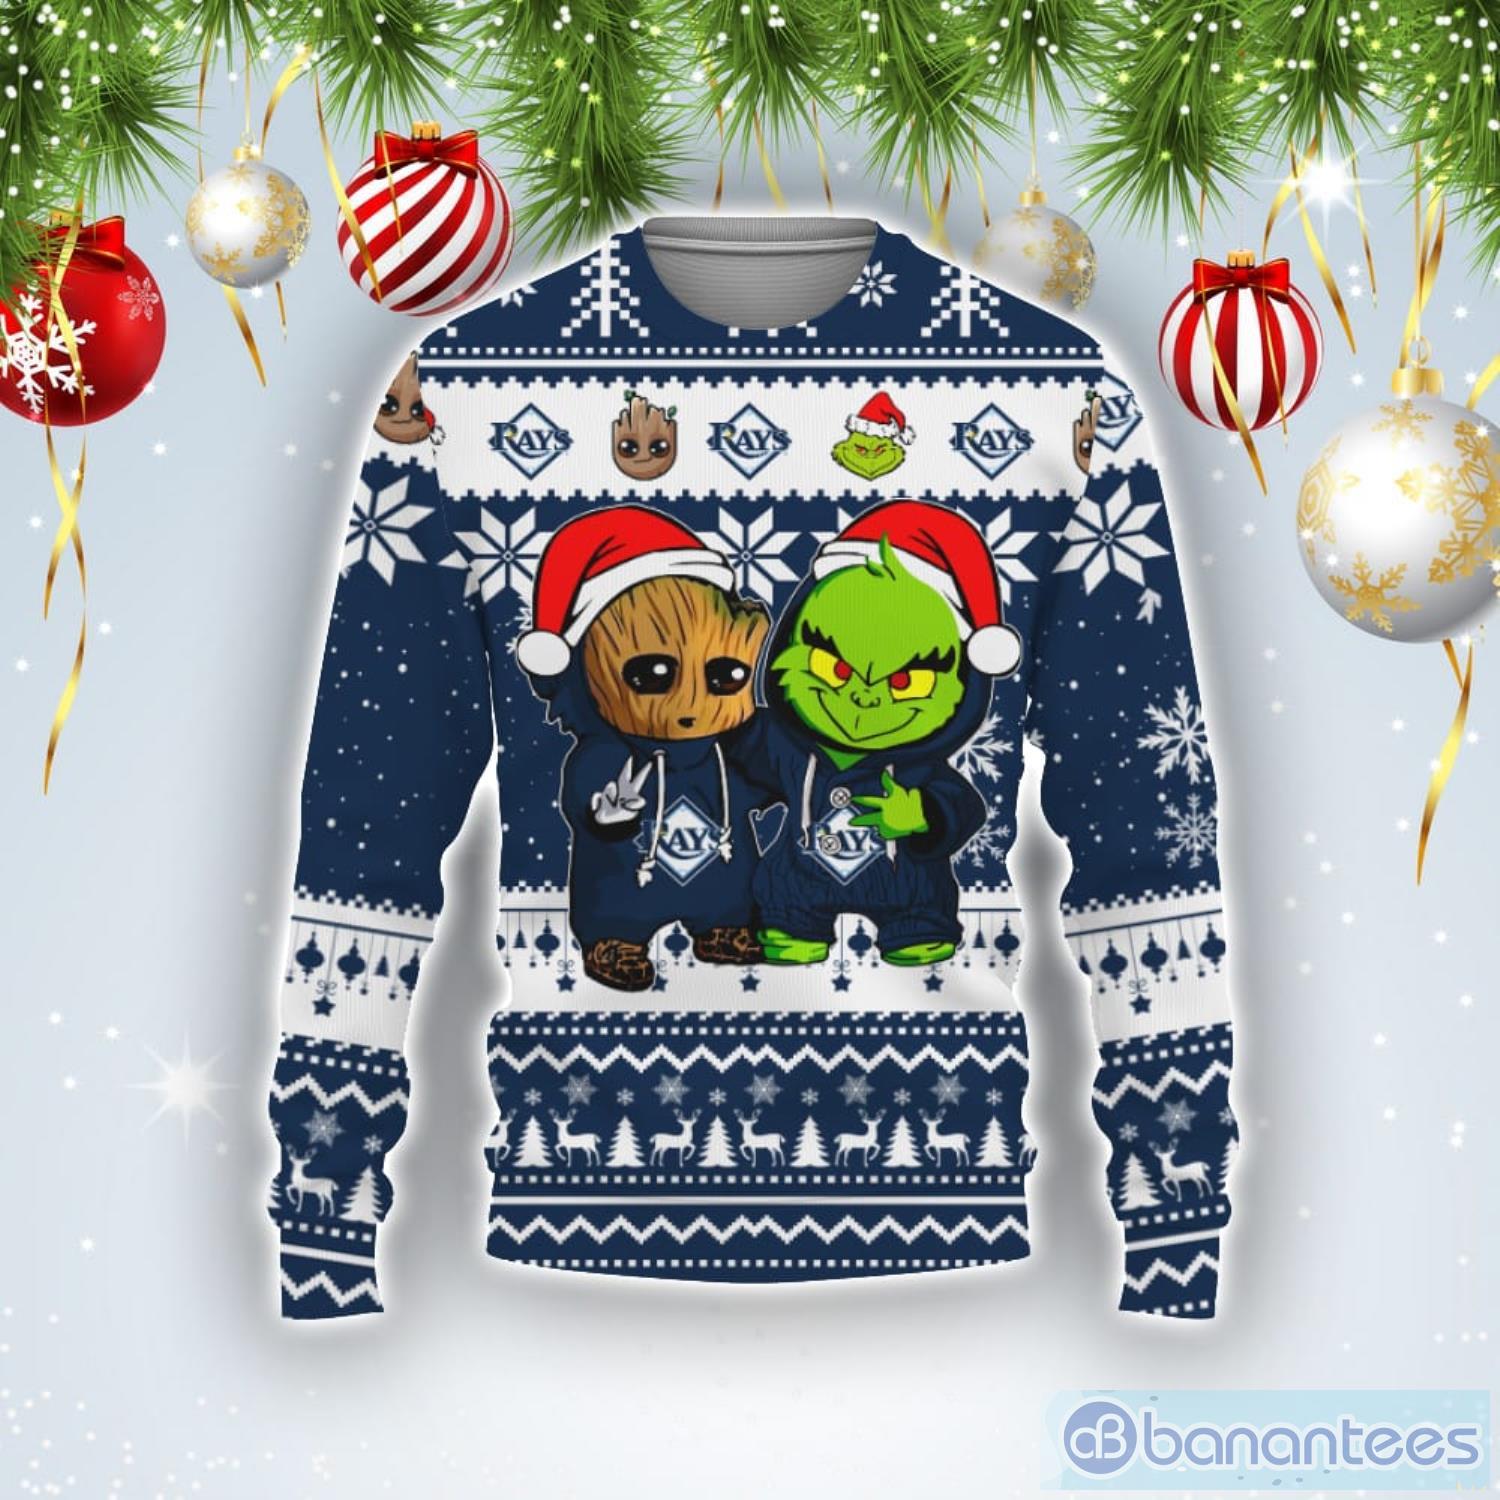 Tampa Bay Rays Baby Groot And Grinch Best Friends Football American Ugly Christmas Sweater Product Photo 1